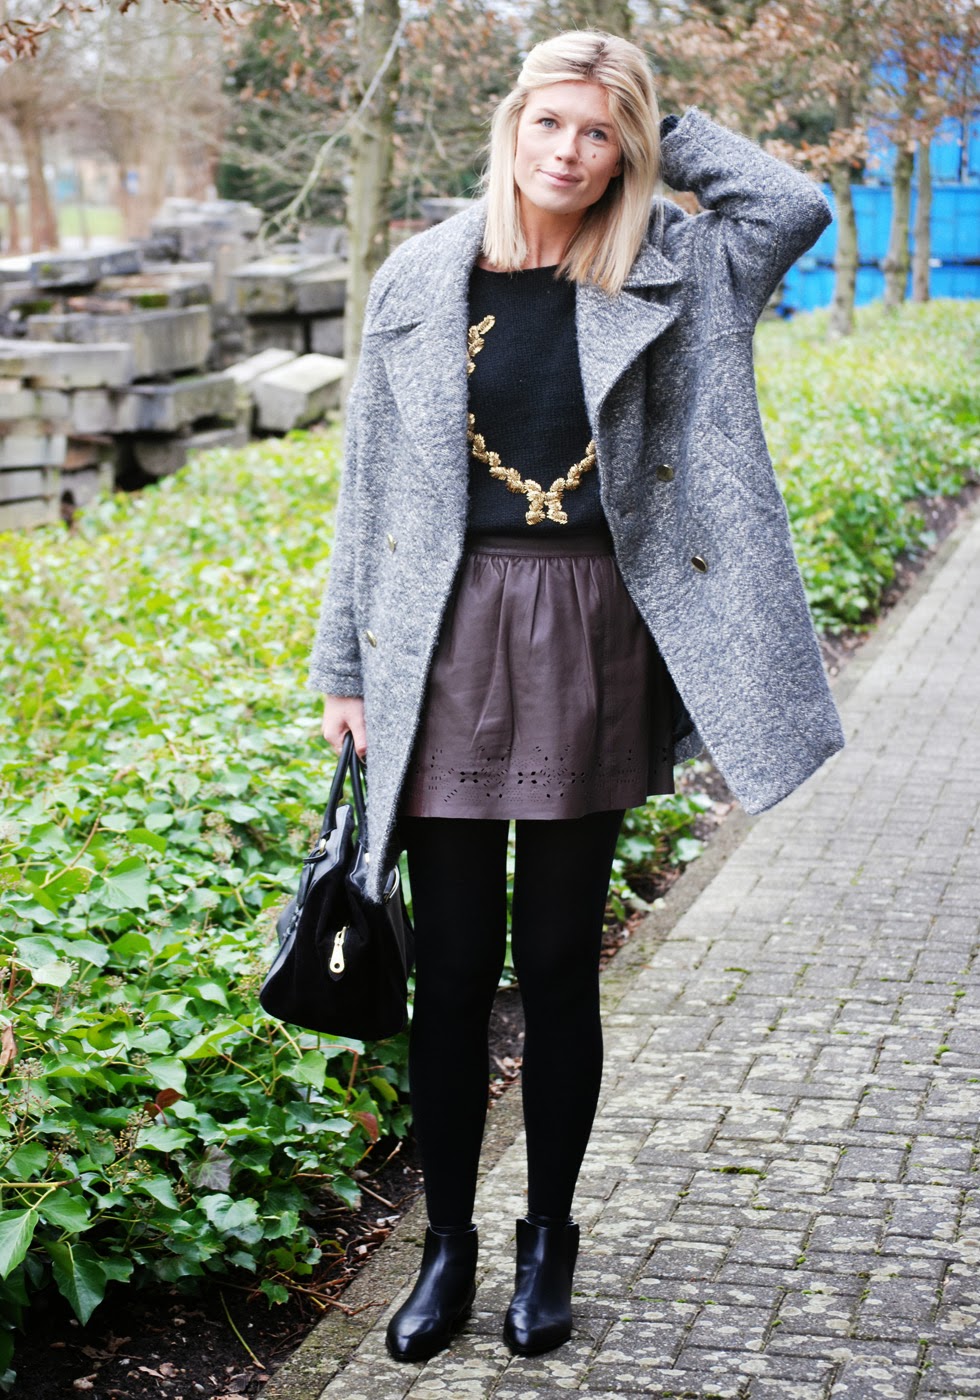 Mirror of Fashion: OUTFIT OF THE DAY // OVERSIZED OUTERWEAR